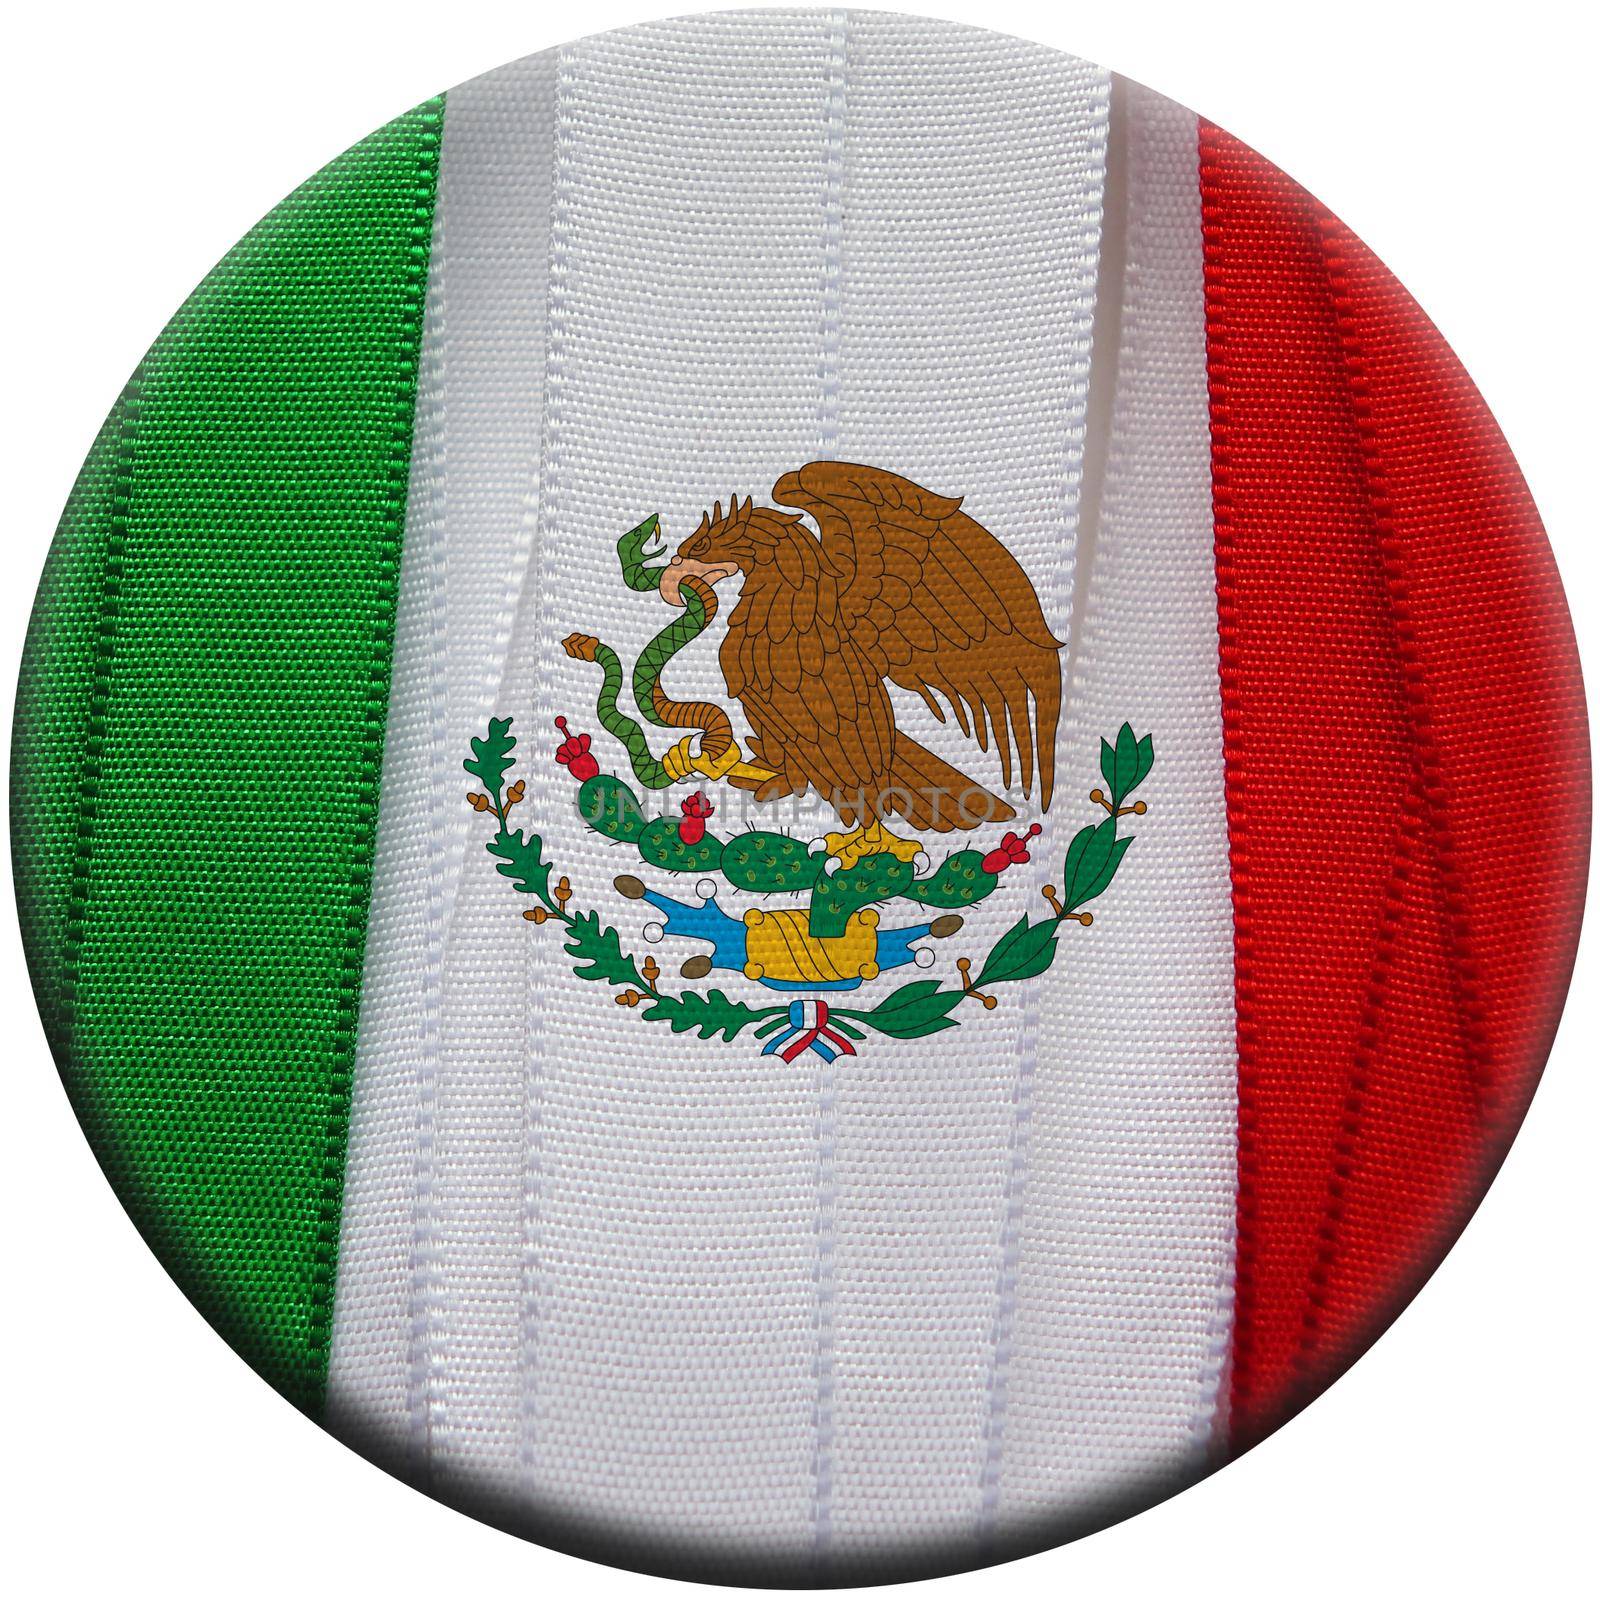 Mexico flag or banner by aroas